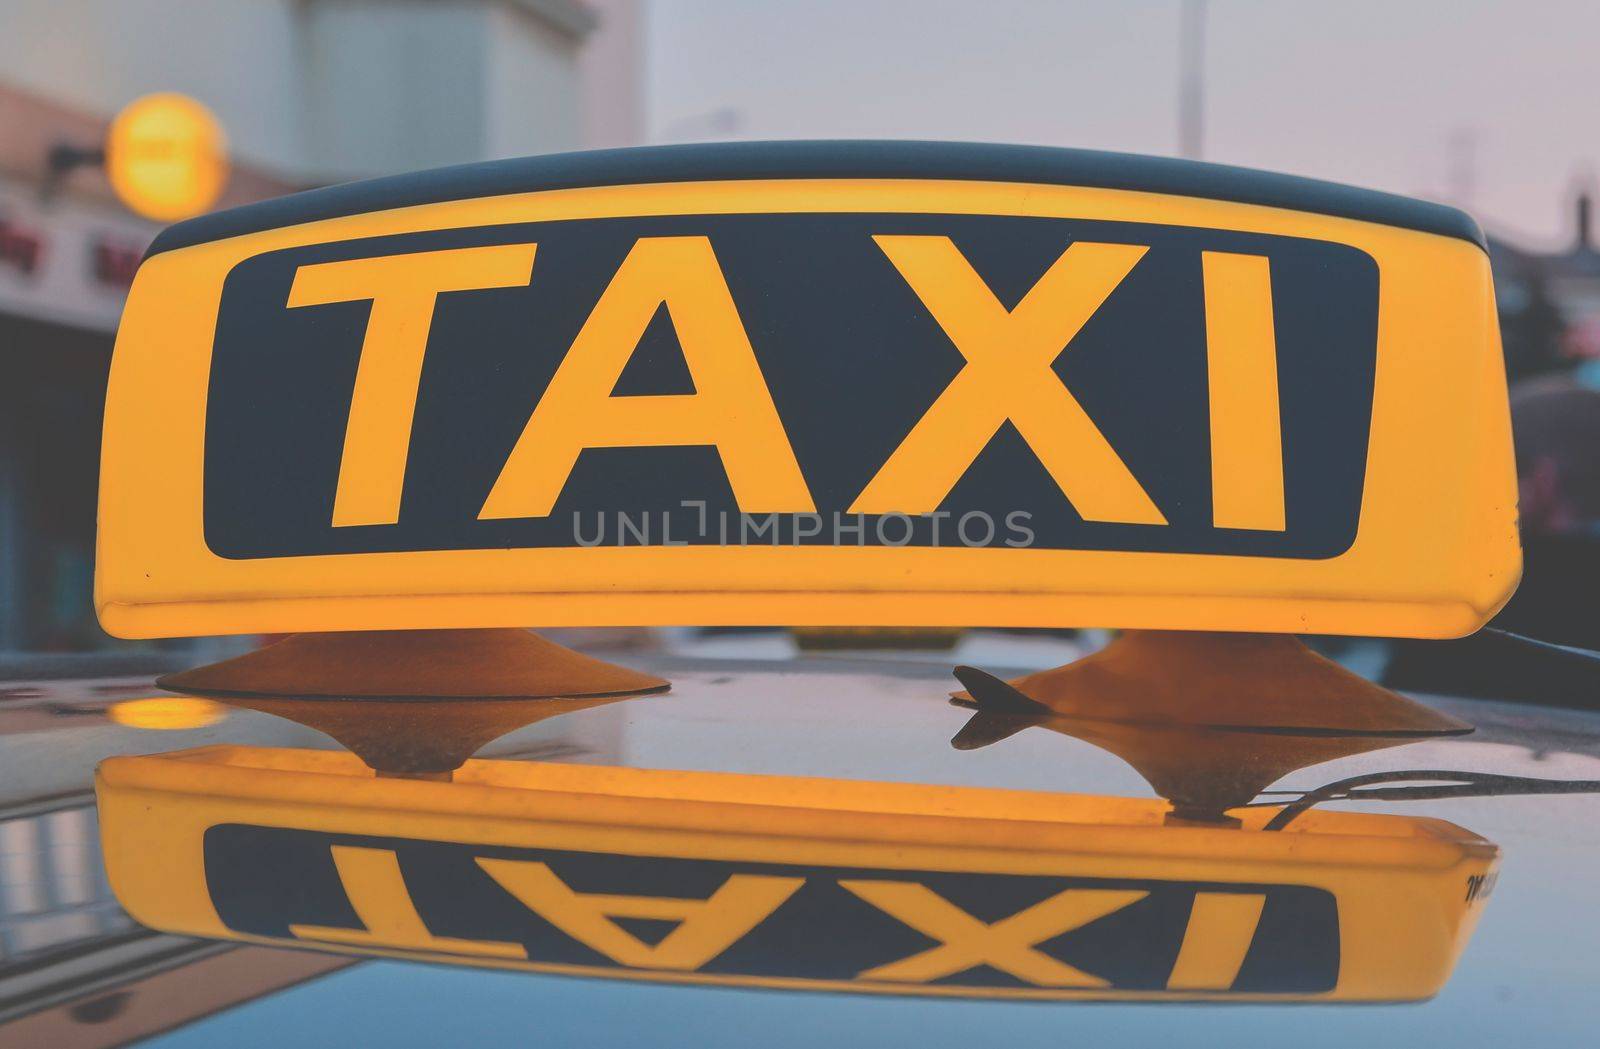 Lit taxi sign on roof of taxi car in the city by roman_nerud